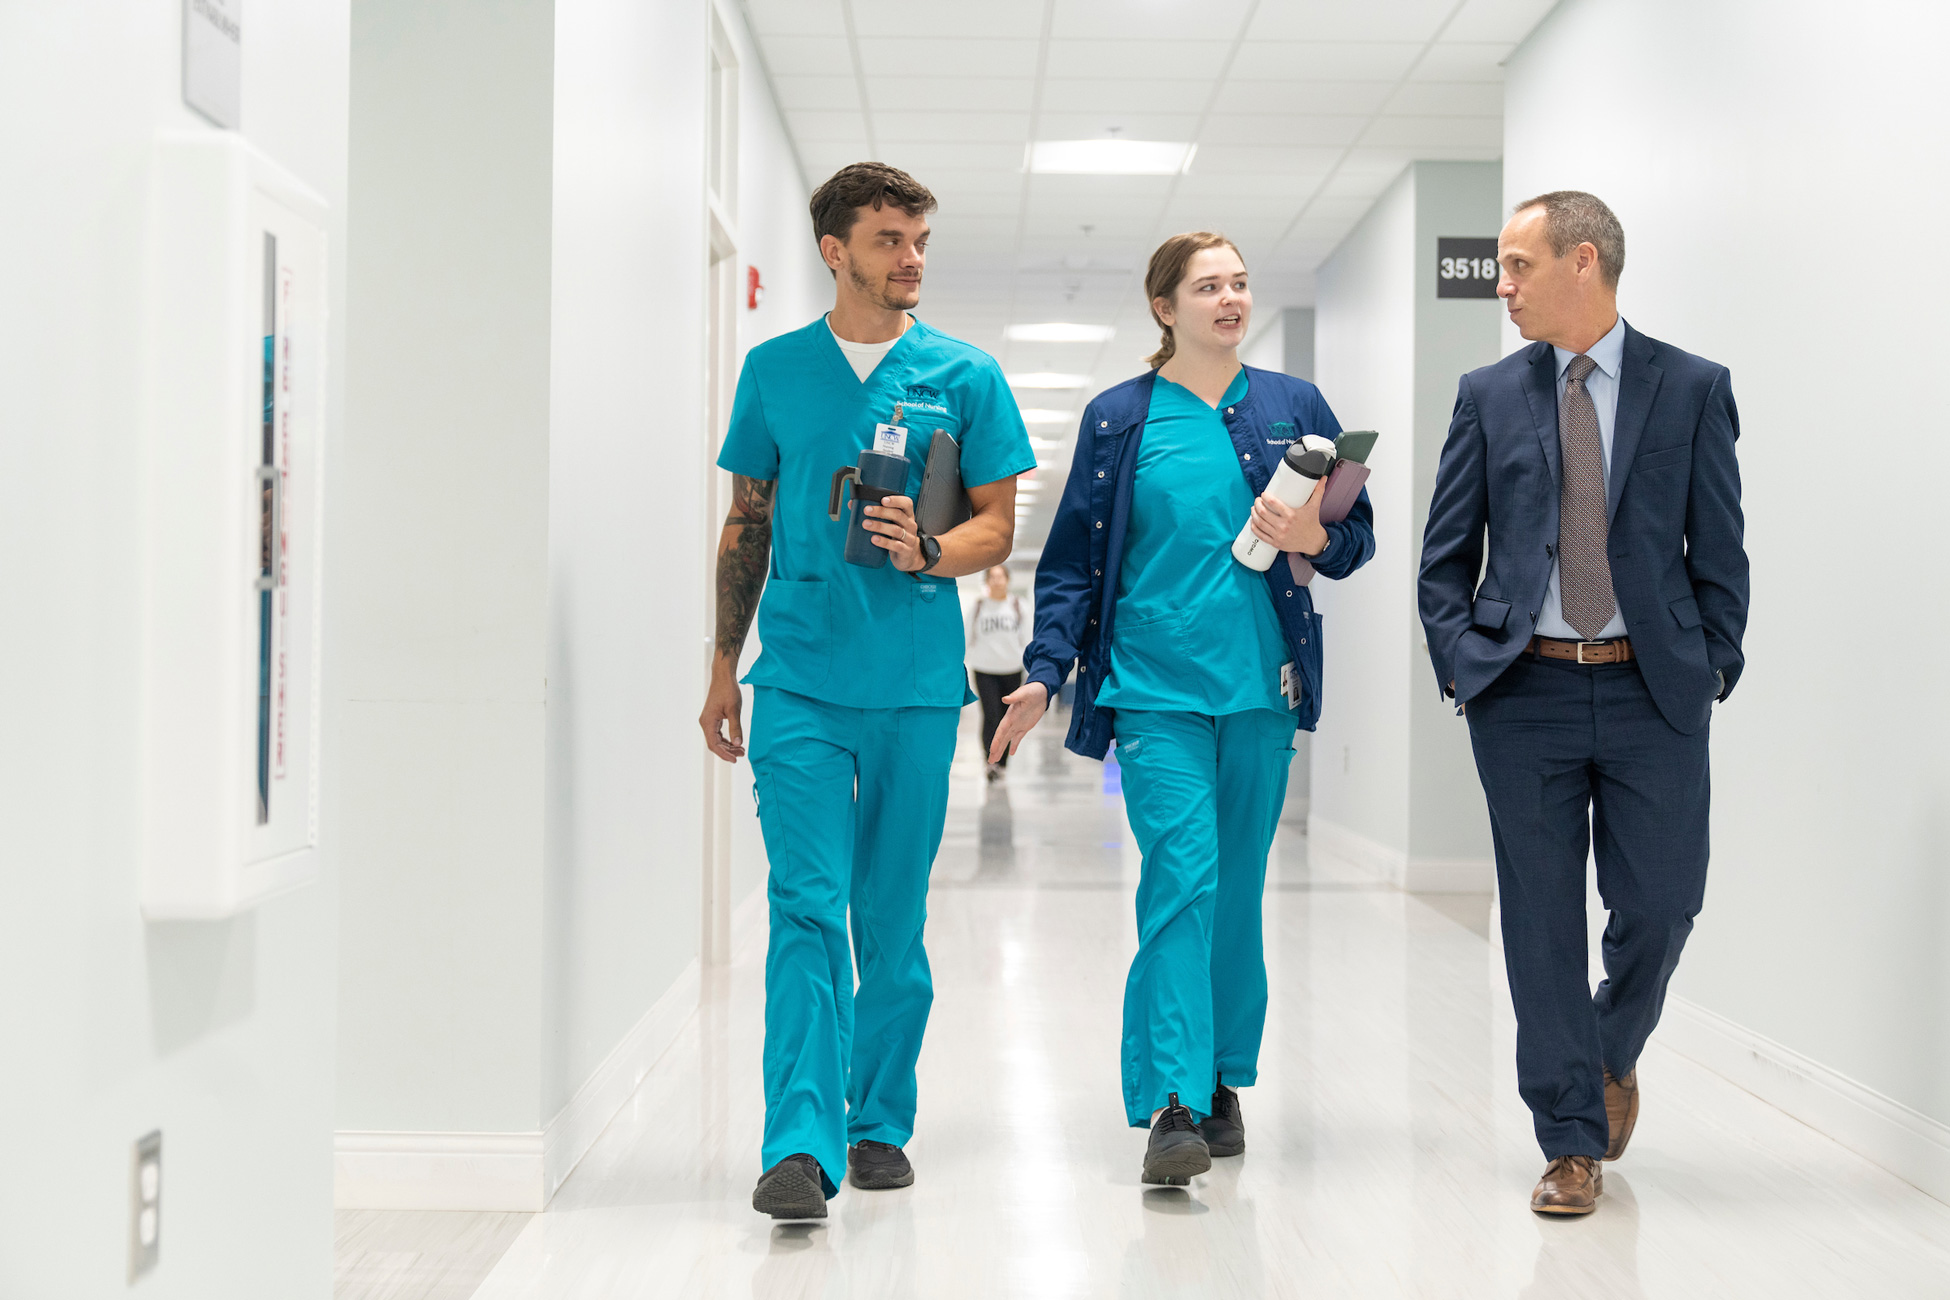 The New Hanover Community Endowment announced grants totaling more than $22.3 million to address critical workforce challenges in New Hanover County, focusing on the recruitment, training and retention of healthcare professionals. 